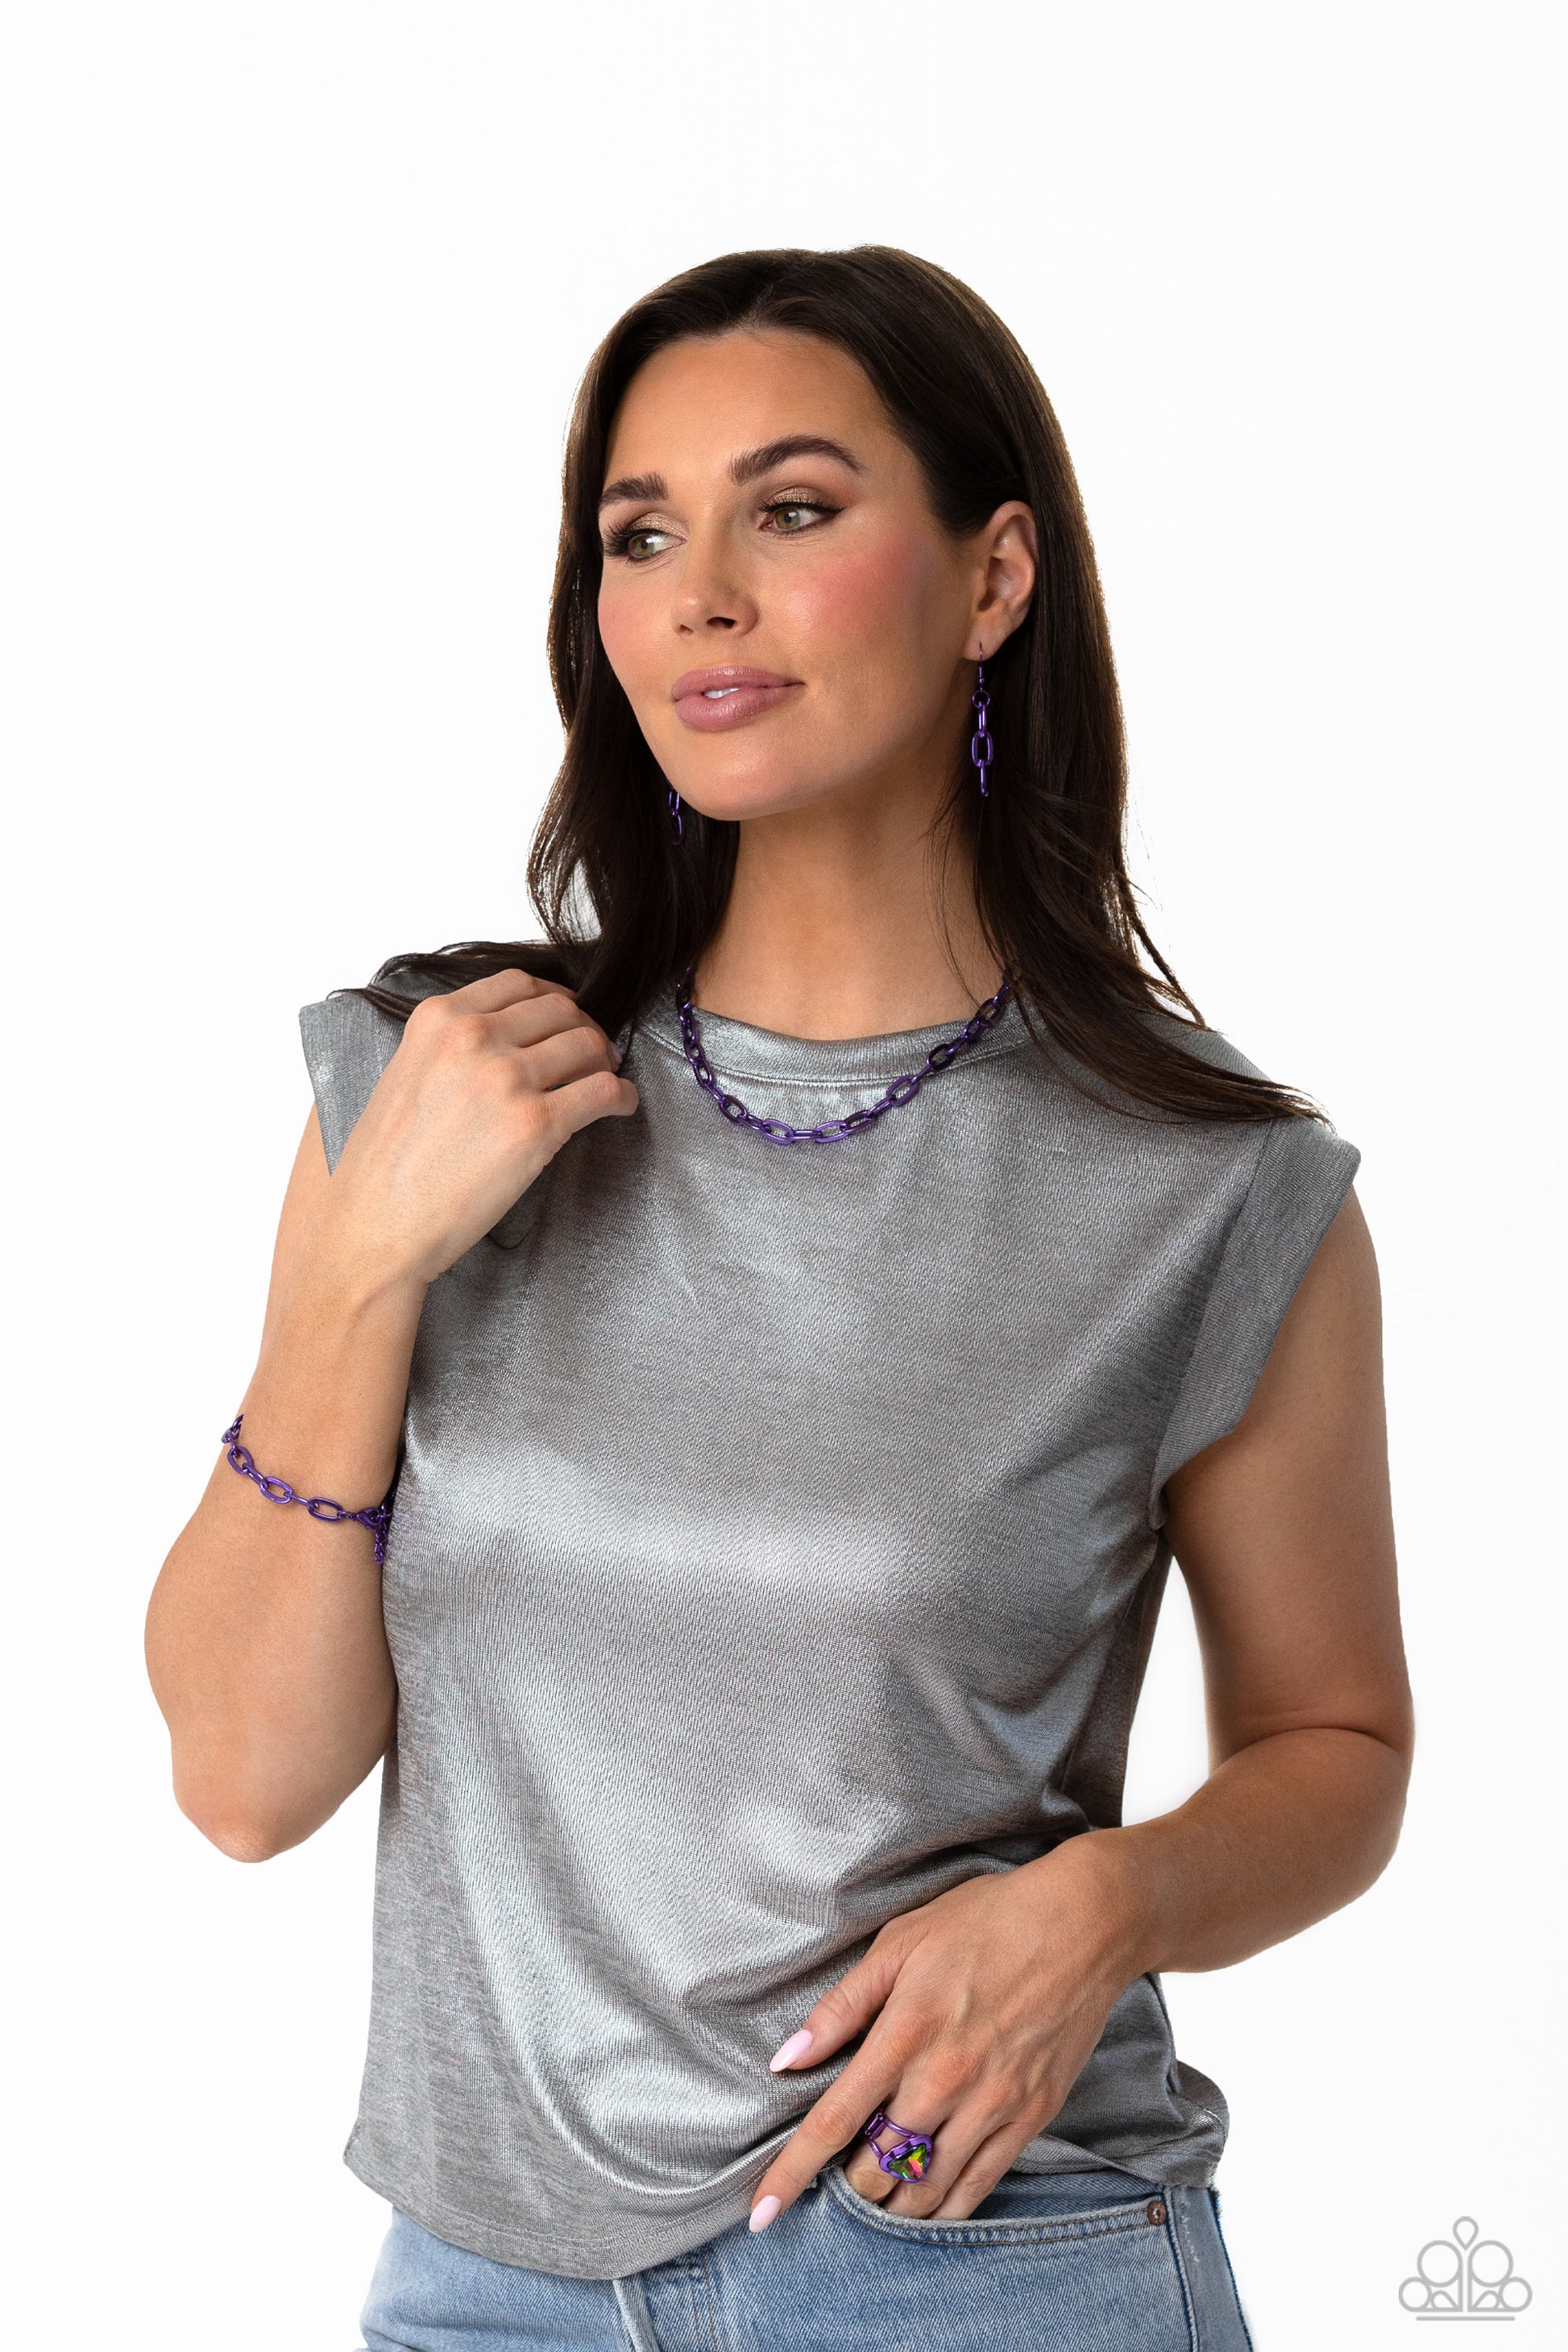 Paparazzi Accessories Energetic Encore - Purple Oversized electric purple links connect around the wrist for a bold urban look. Features an adjustable clasp closure. Sold as one individual bracelet. Get The Complete Look! Necklace: "Exuberant Encore - Pur